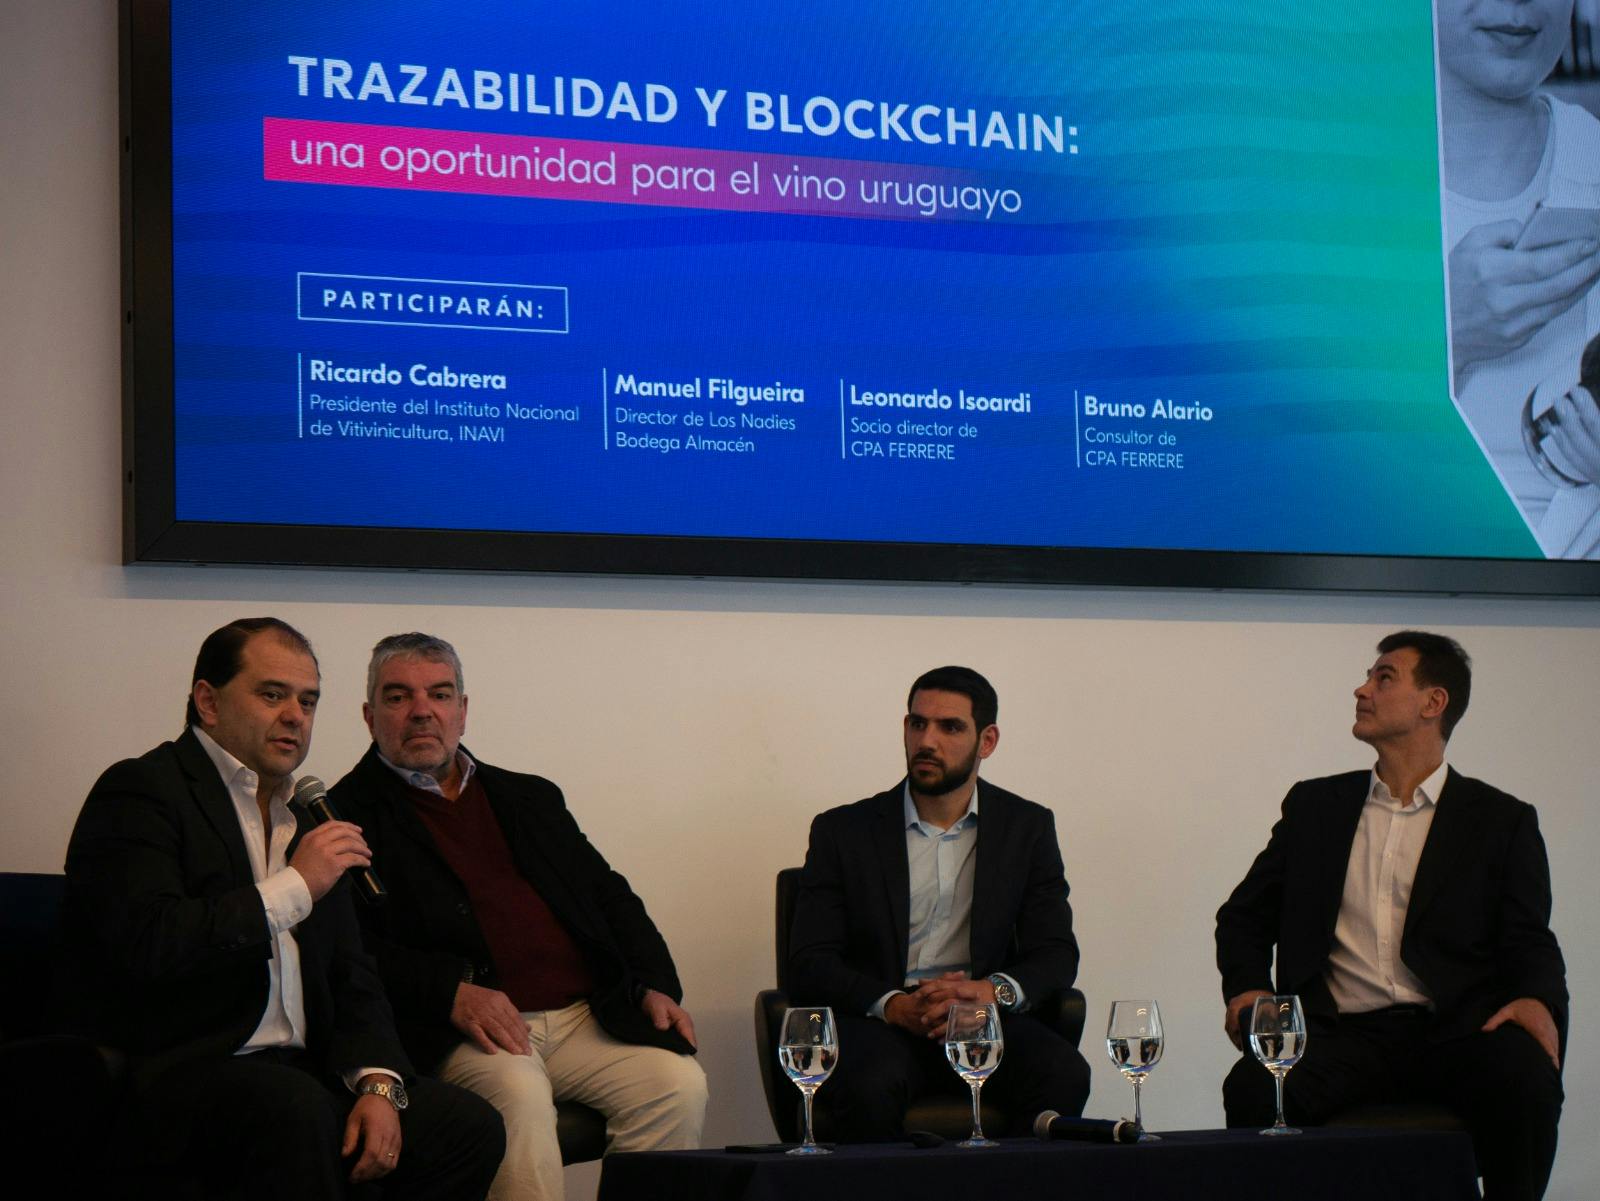 Uruguay: CPA FERRERE and KYAS presented platform for wine traceability using Blockchain